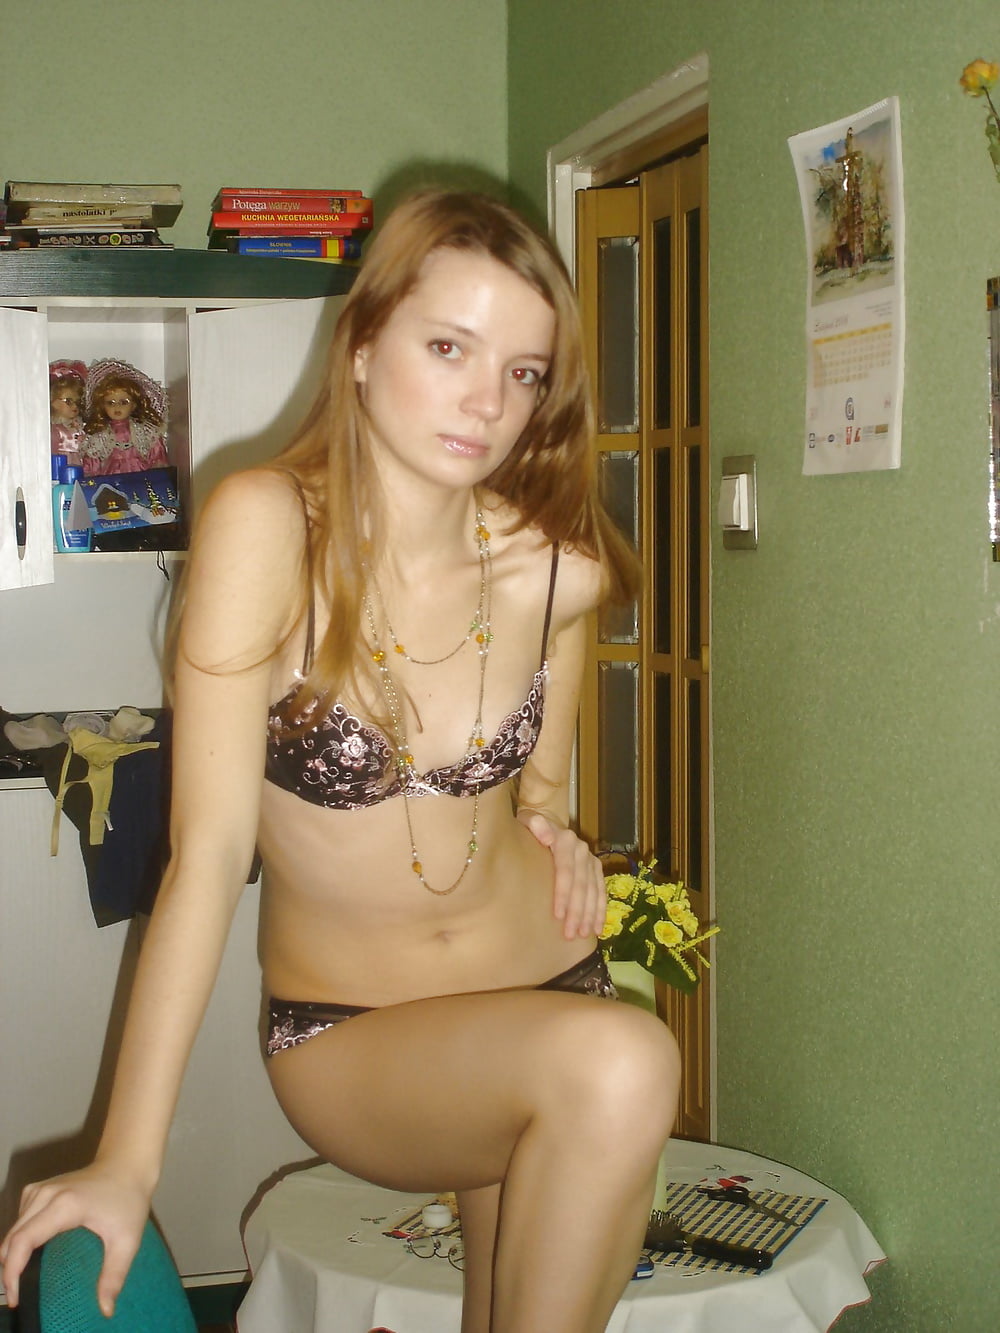 amateur teen posing nude: private pics part 2 adult photos